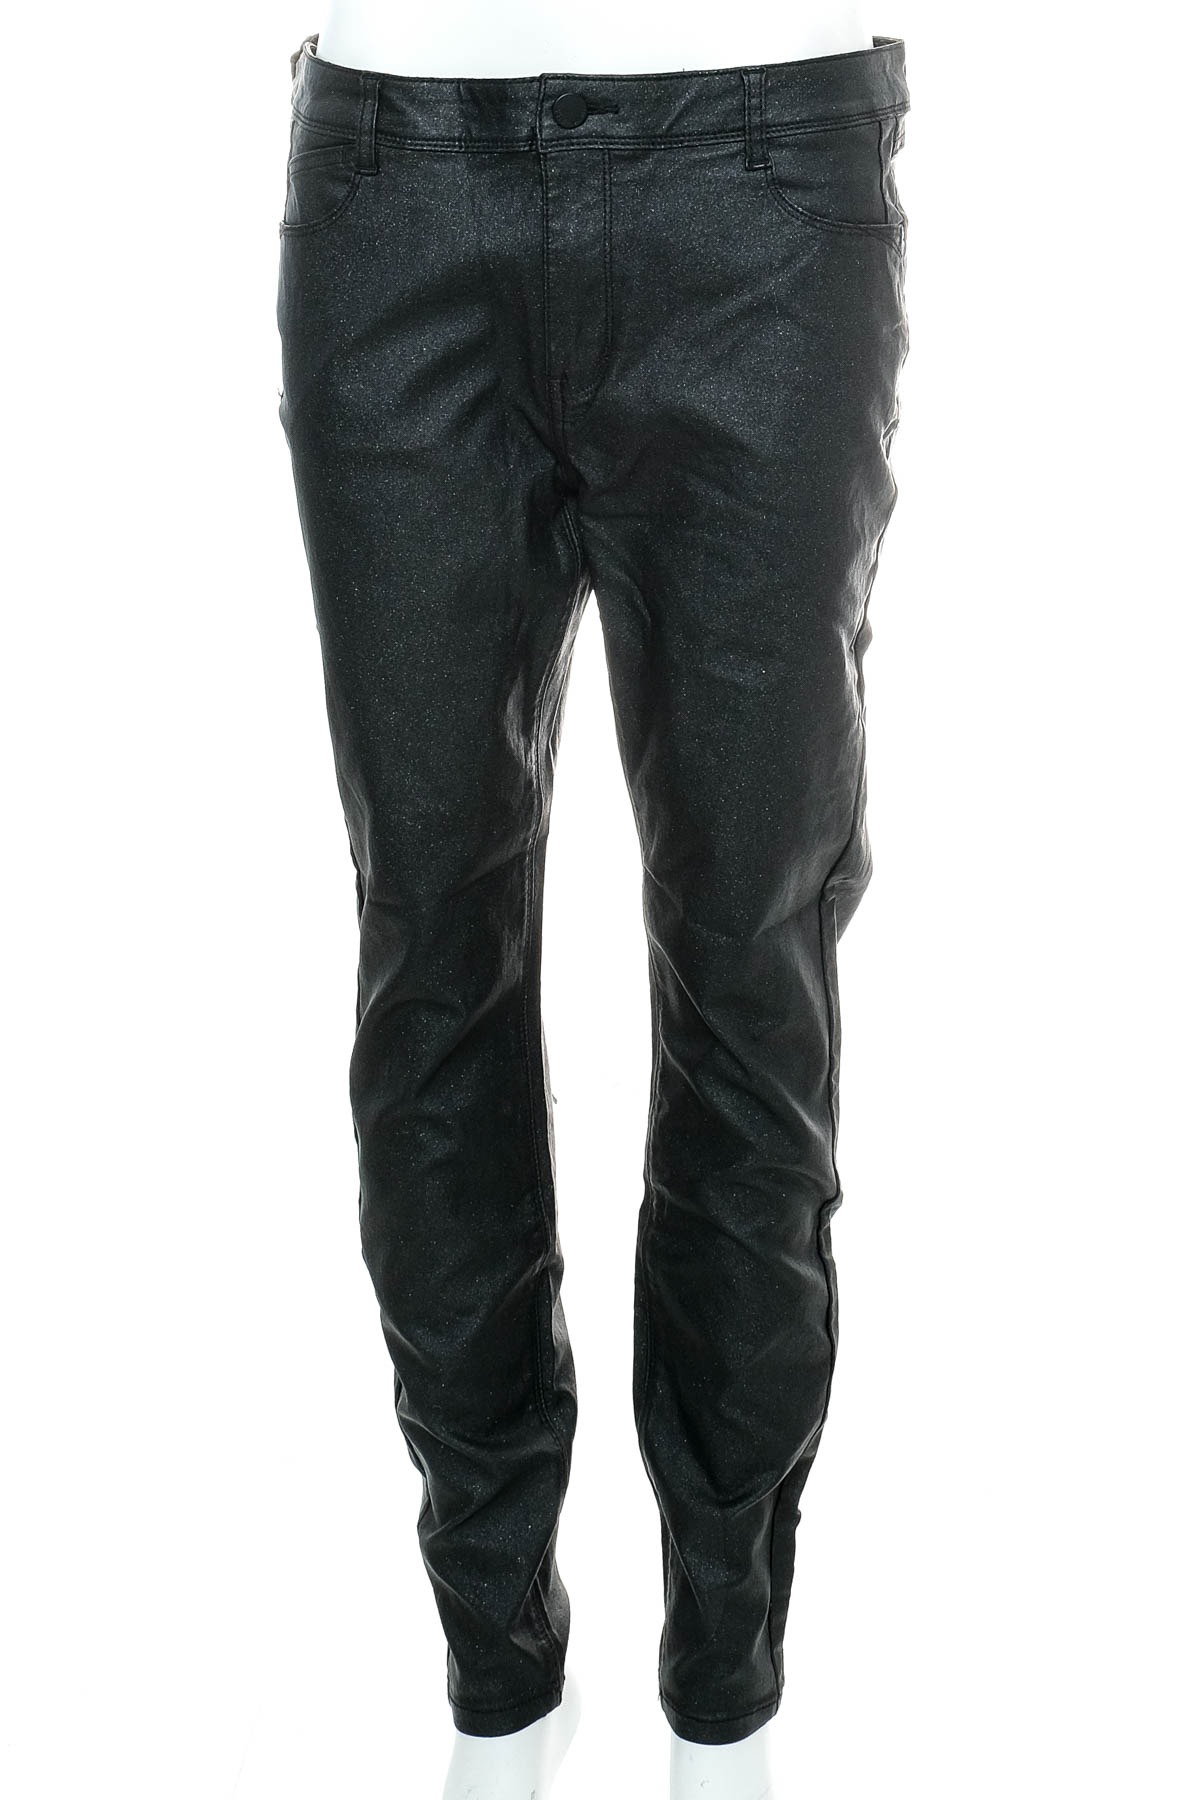 Women's leather trousers - Yessica - 0